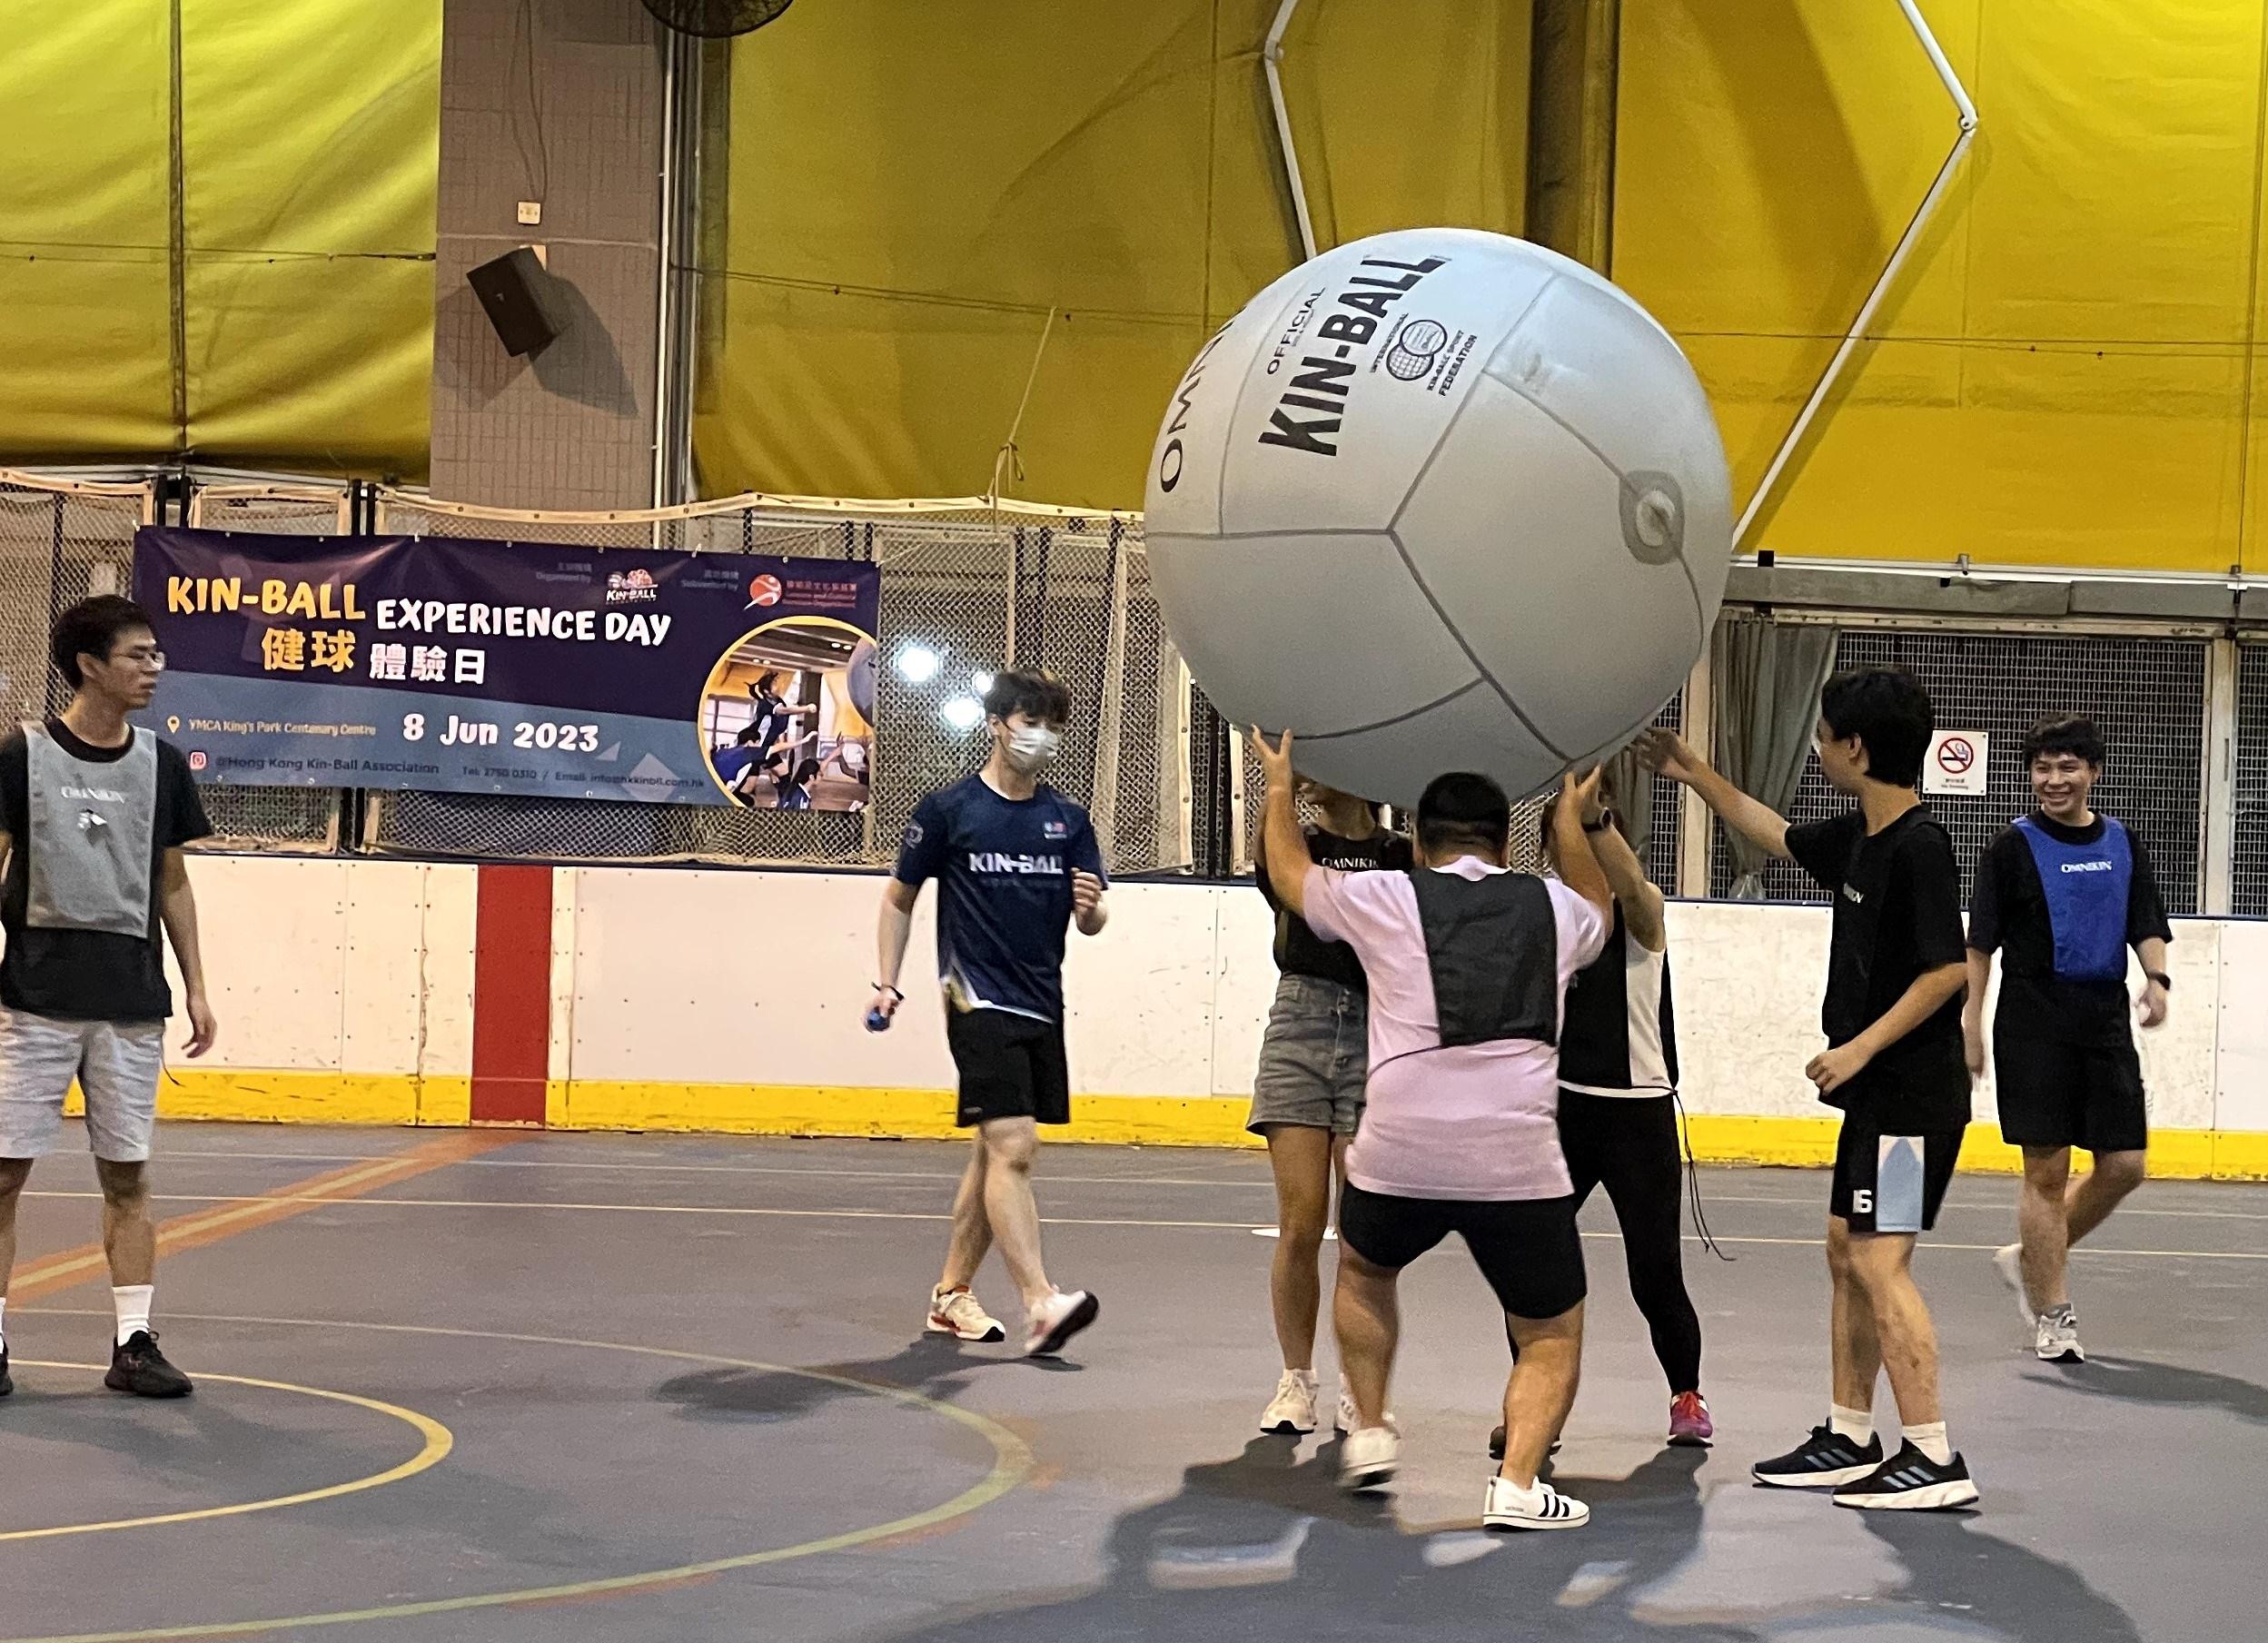 The Leisure and Cultural Services Department announced that applications for the 2024-25 Pilot Scheme on Subvention for New Sports start today (January 15) to promote the development of new sports. Photo shows "Kin-Ball", which is a new sport subvented by the scheme earlier.